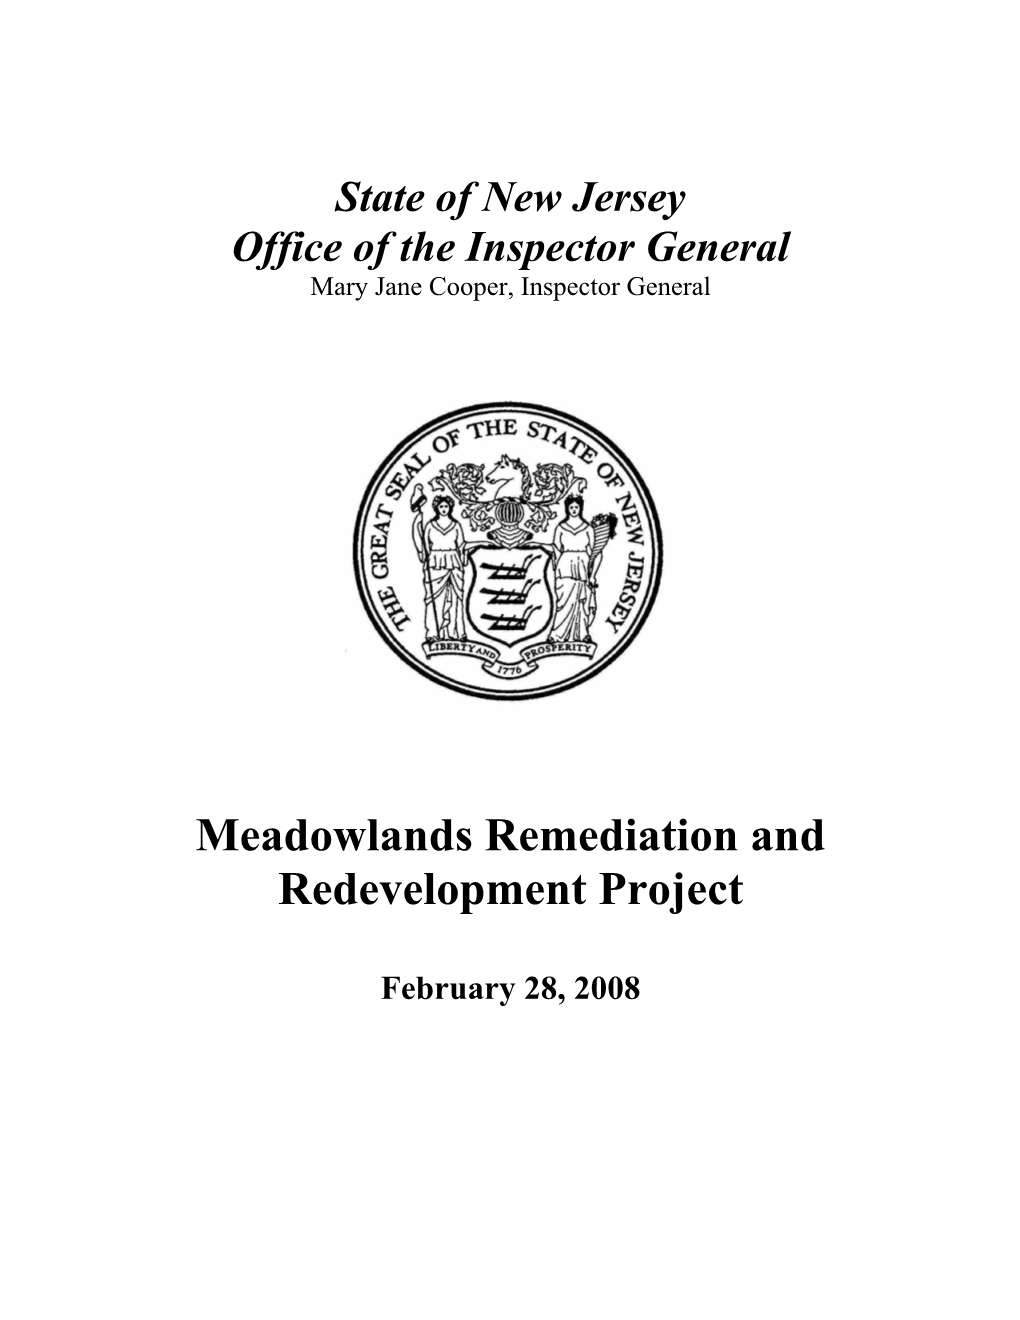 Meadowlands Remediation and Redevelopment Project